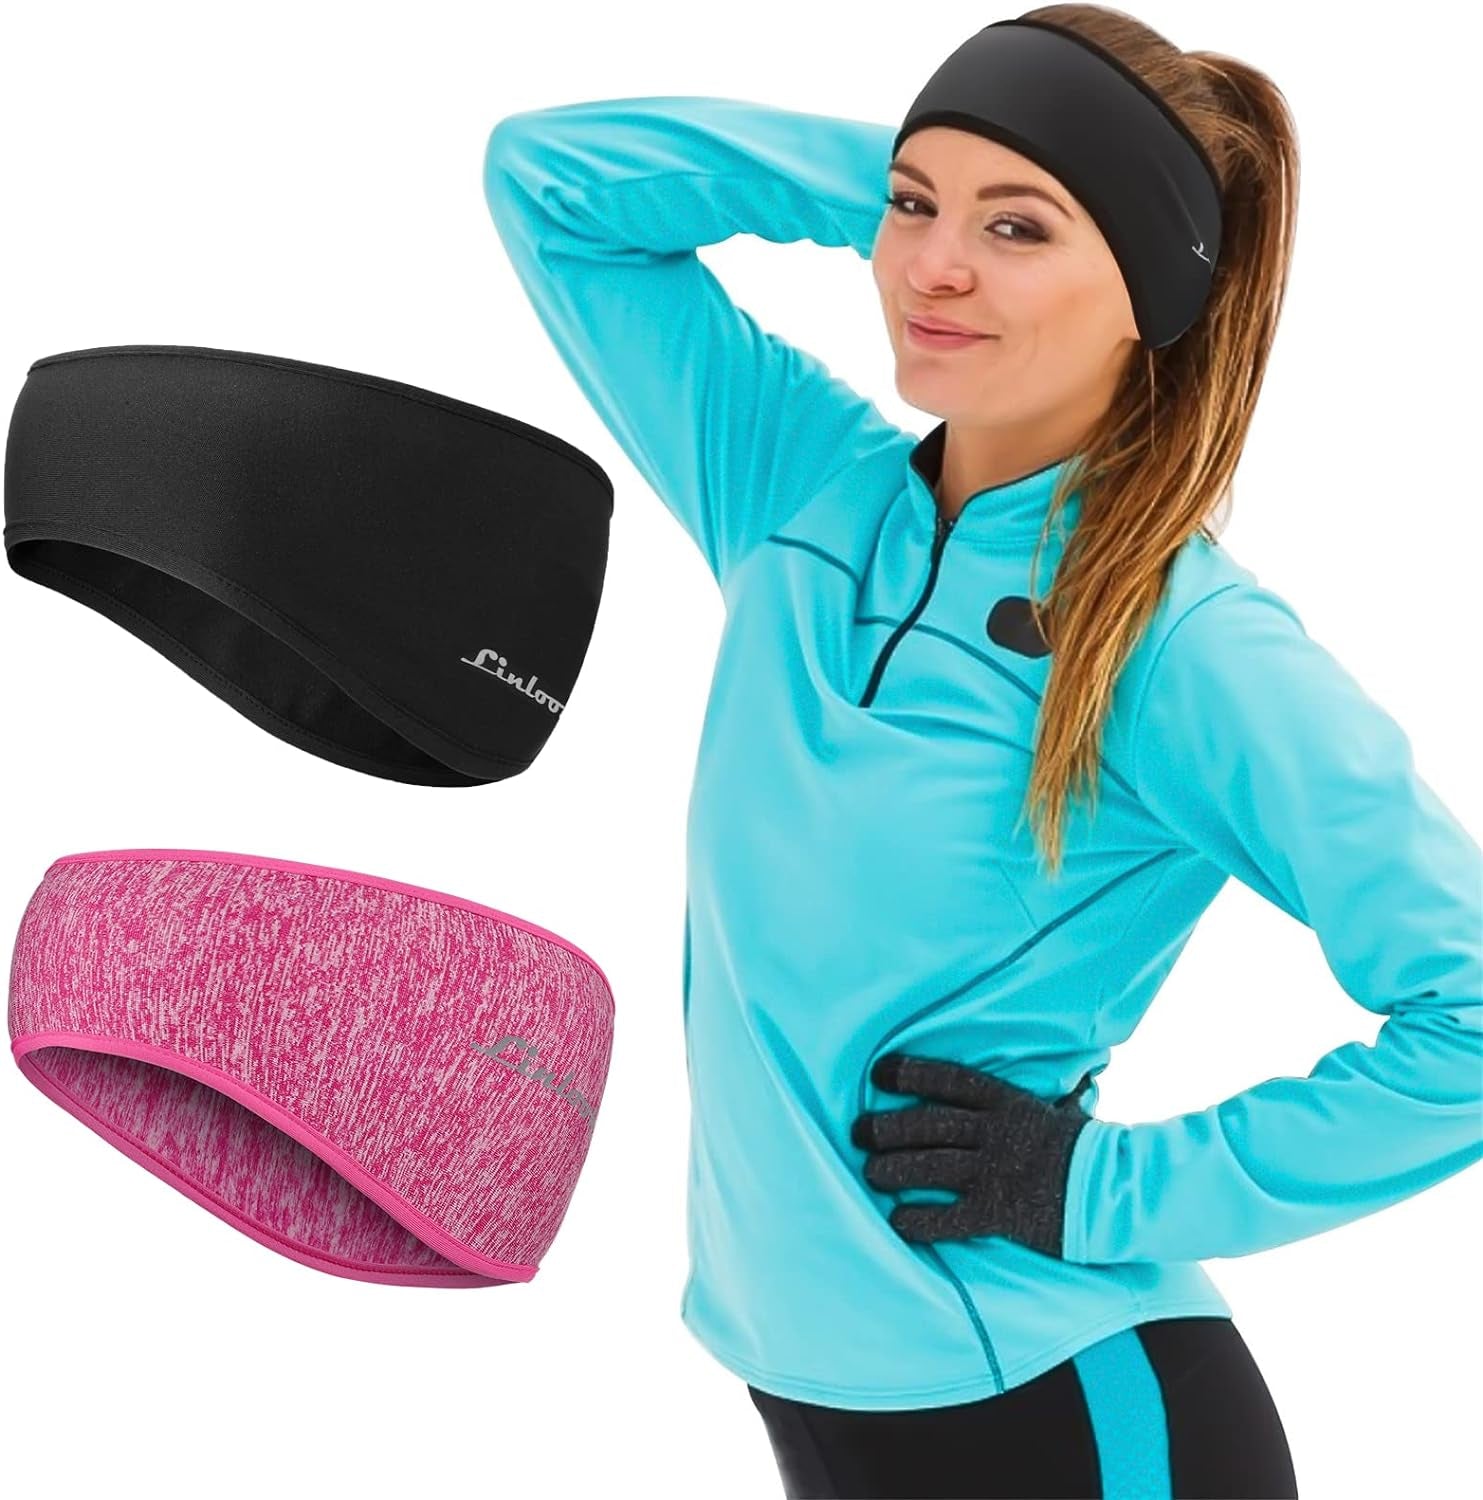 Winter Ear Warmer Headband for Women and Men - Fleece Stretchy Thermal Ear Muffs for Running Hiking Ski Cycling Jogging 2 Pack